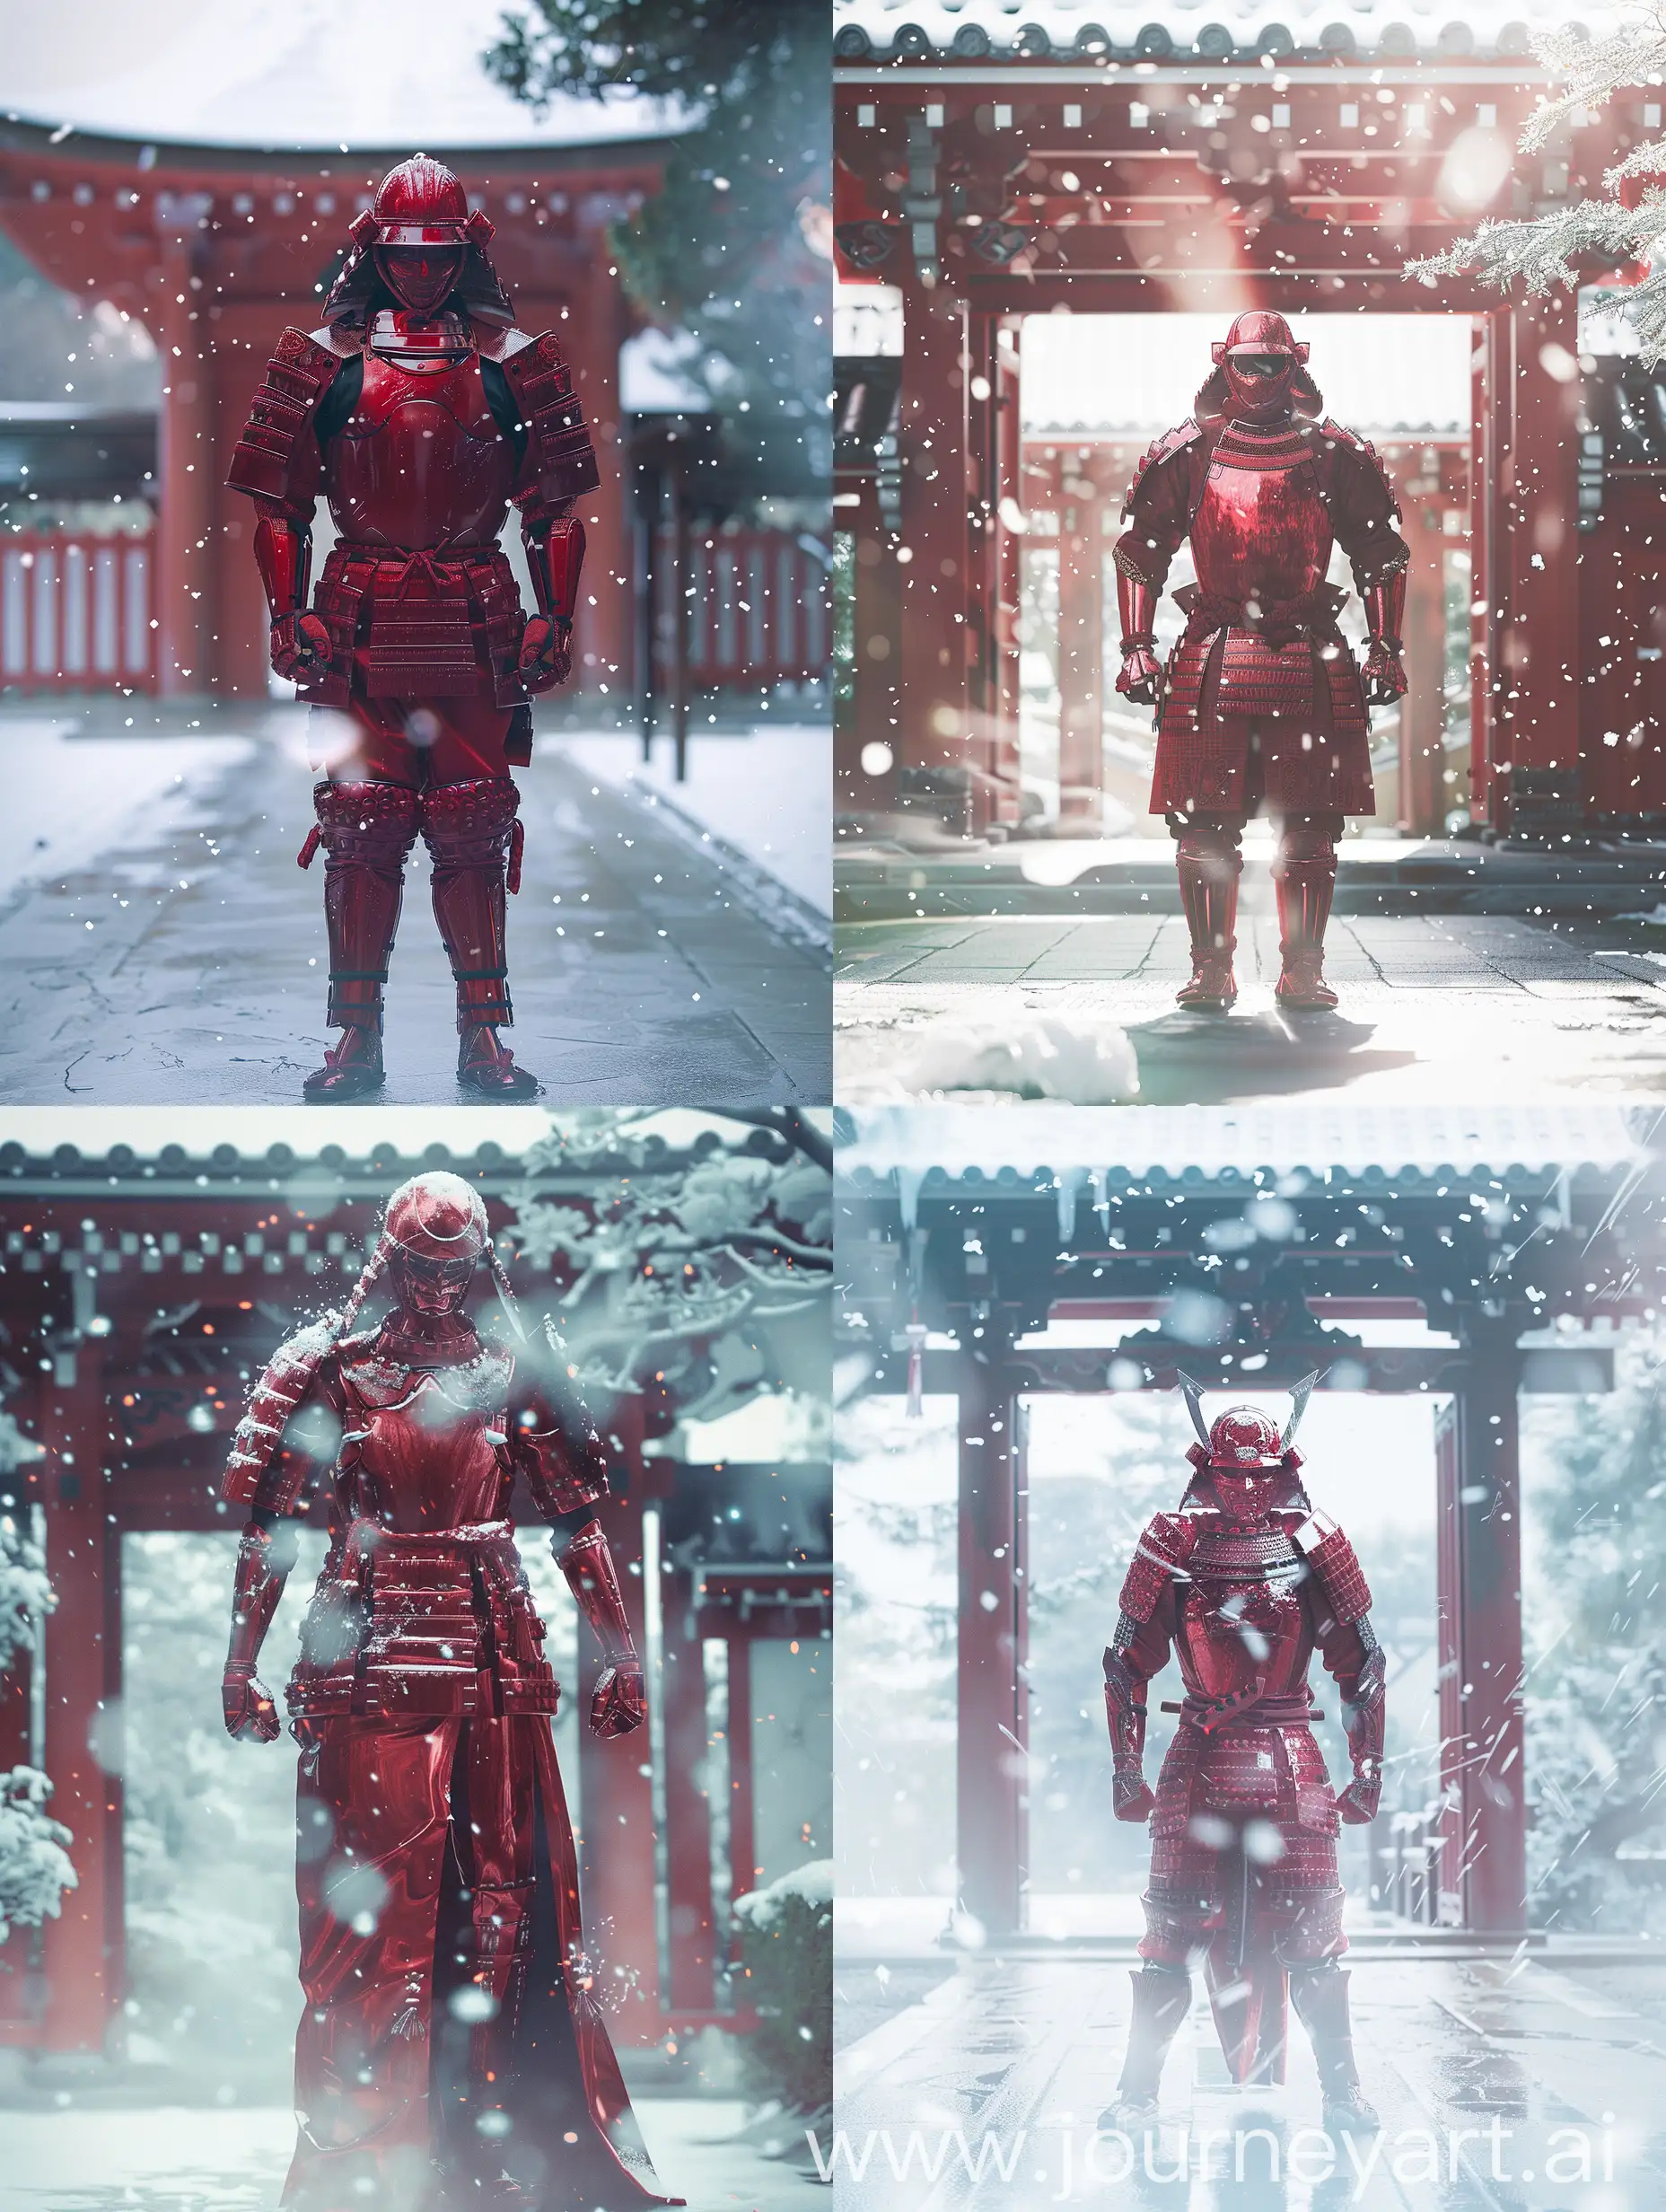 Title: "Fashion Editorial: The Supreme Samurai"
Description:
Our latest fashion editorial is set at a Japanese temple, combining tradition and contemporary style. Our main figure is the Supreme Samurai.
Our samurai, in a red armor, stands in the peaceful temple grounds. The armor is detailed and shiny, catching light.
The scene is set with a light snow, giving a soft glow around our samurai. The image composition has been thoughtfully done to highlight modern elegance.
The image balances symmetry and harmony, merging fashion and tradition. Our samurai's stance and gaze express the strength of a stylish, modern warrior.
This editorial is not just about fashion, it's about power, grace, and timeless beauty. Welcome to the world of the Supreme Samurai, where fashion is paramount.